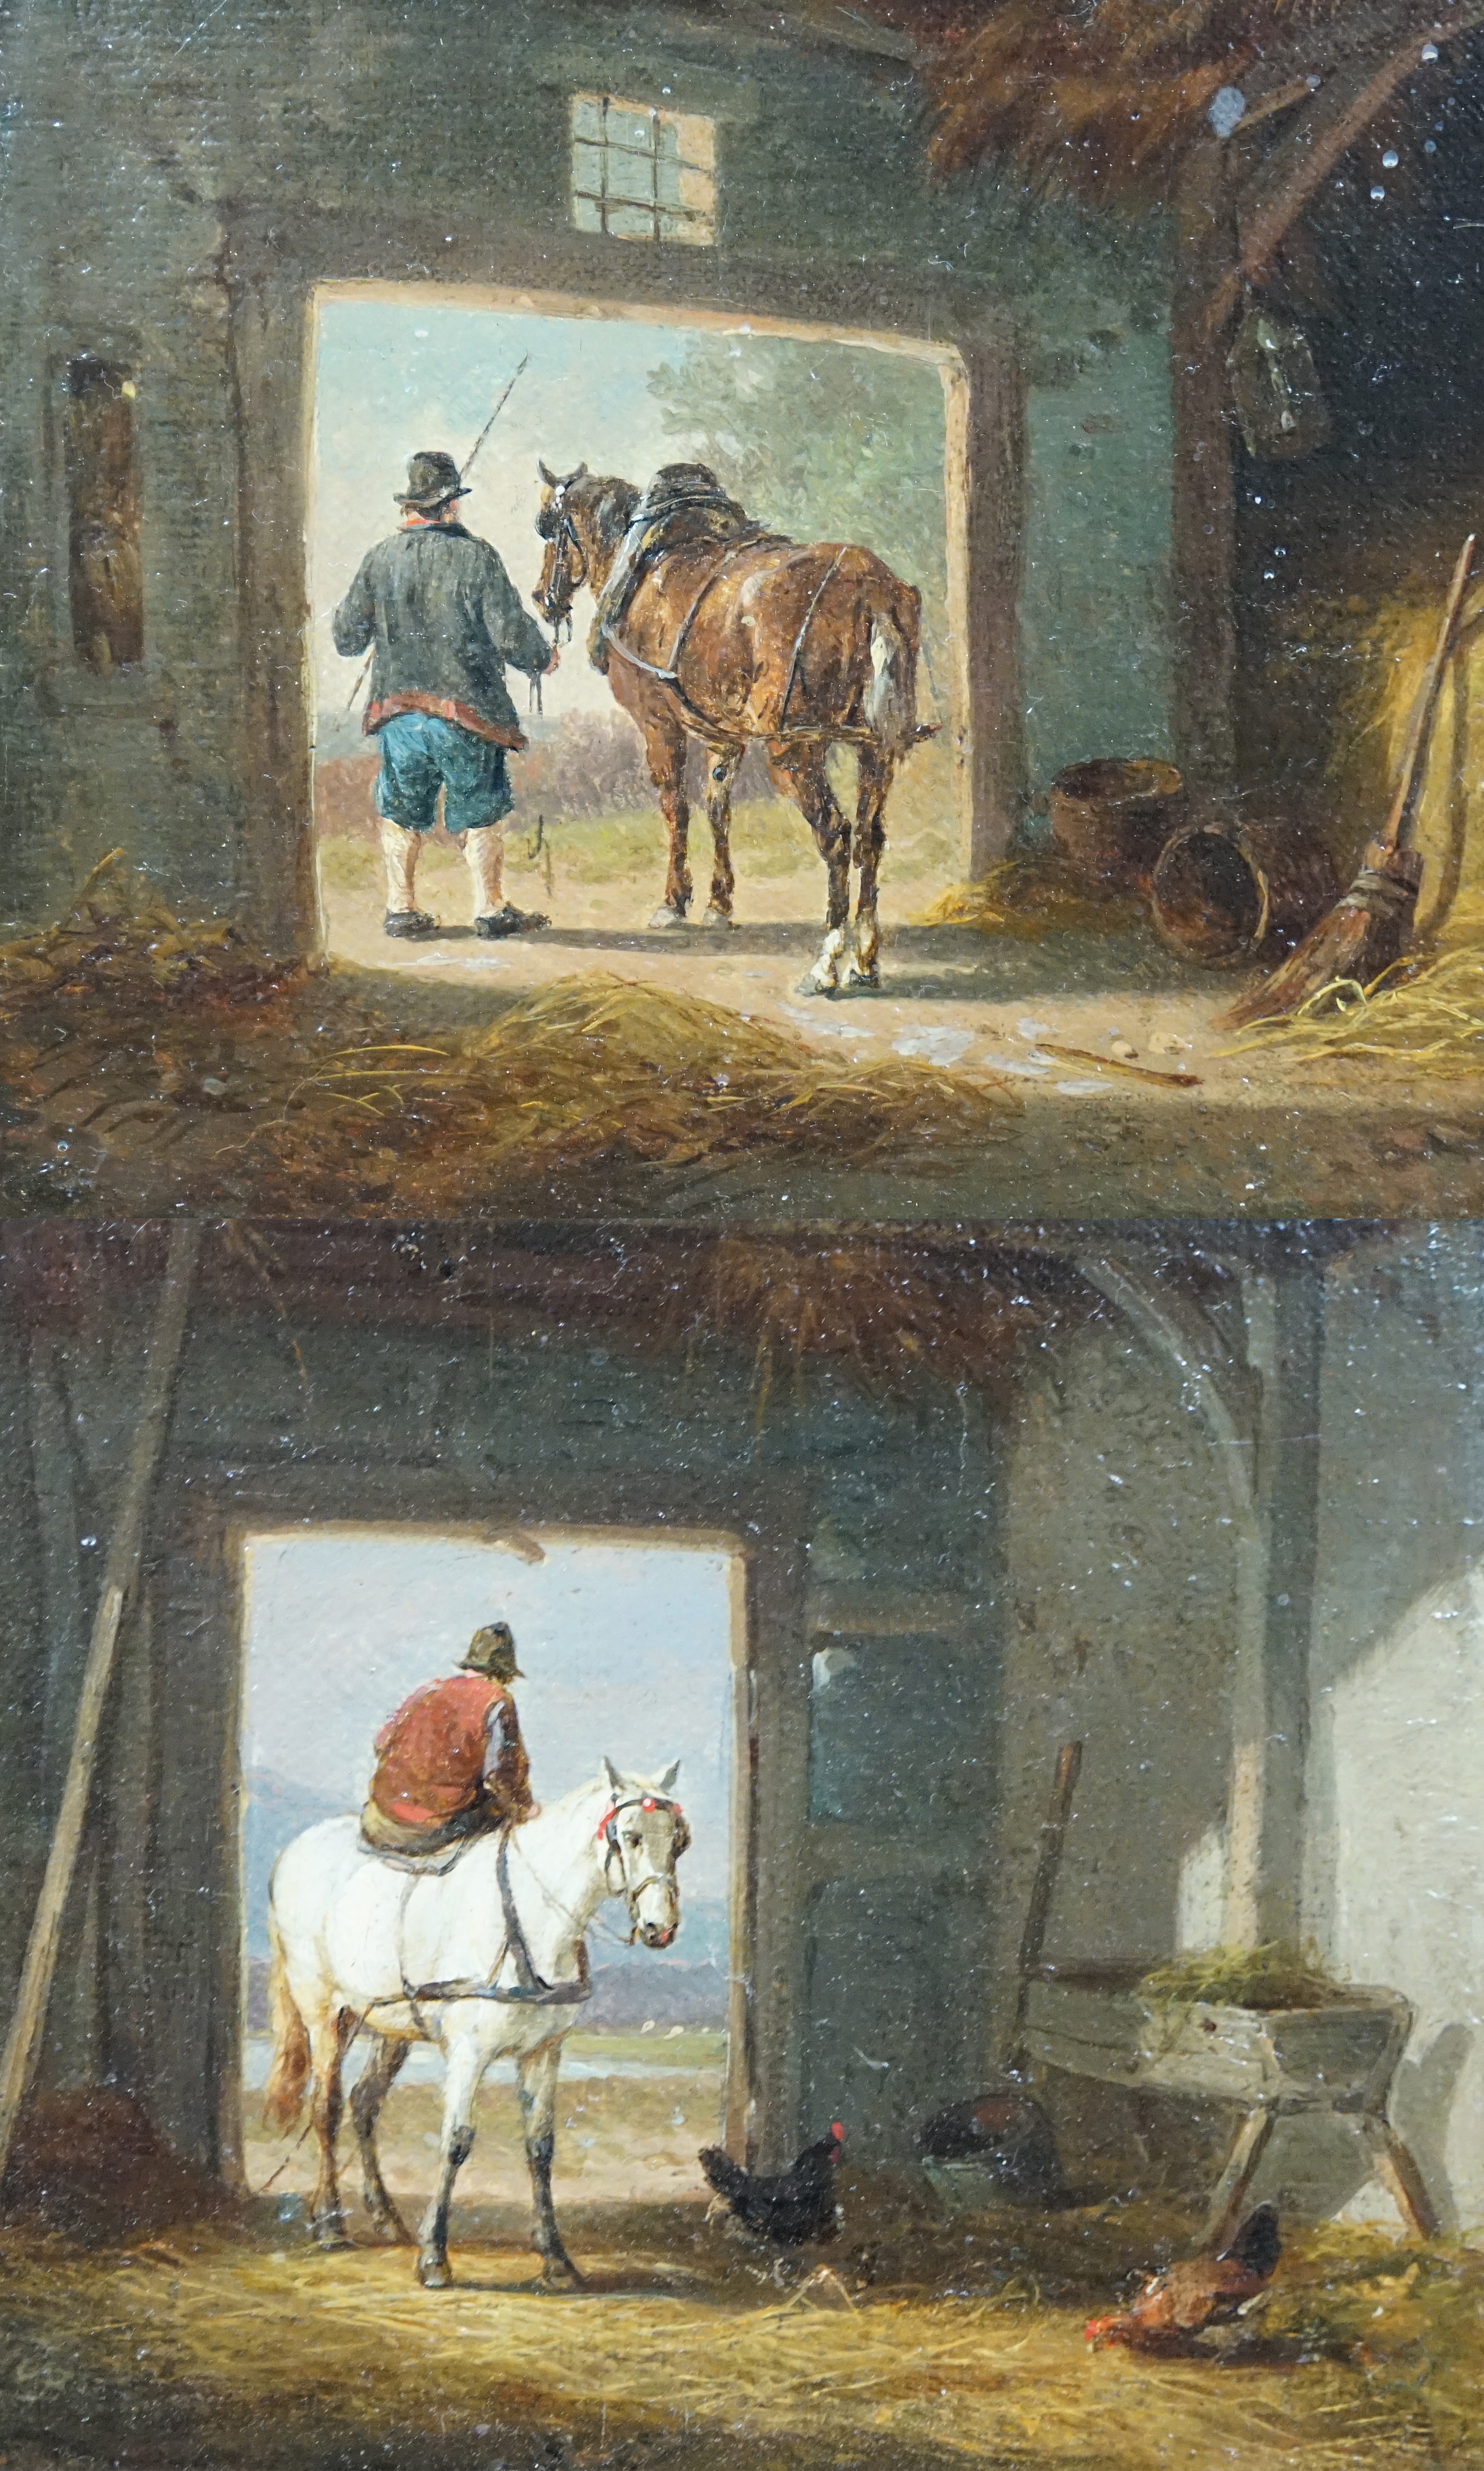 Attributed to Eugene Verboeckhoven (Belgian, 1798-1881), pair of oils on canvas laid on board, Horse and rider entering and leaving a stable, 12 x 14.5cm